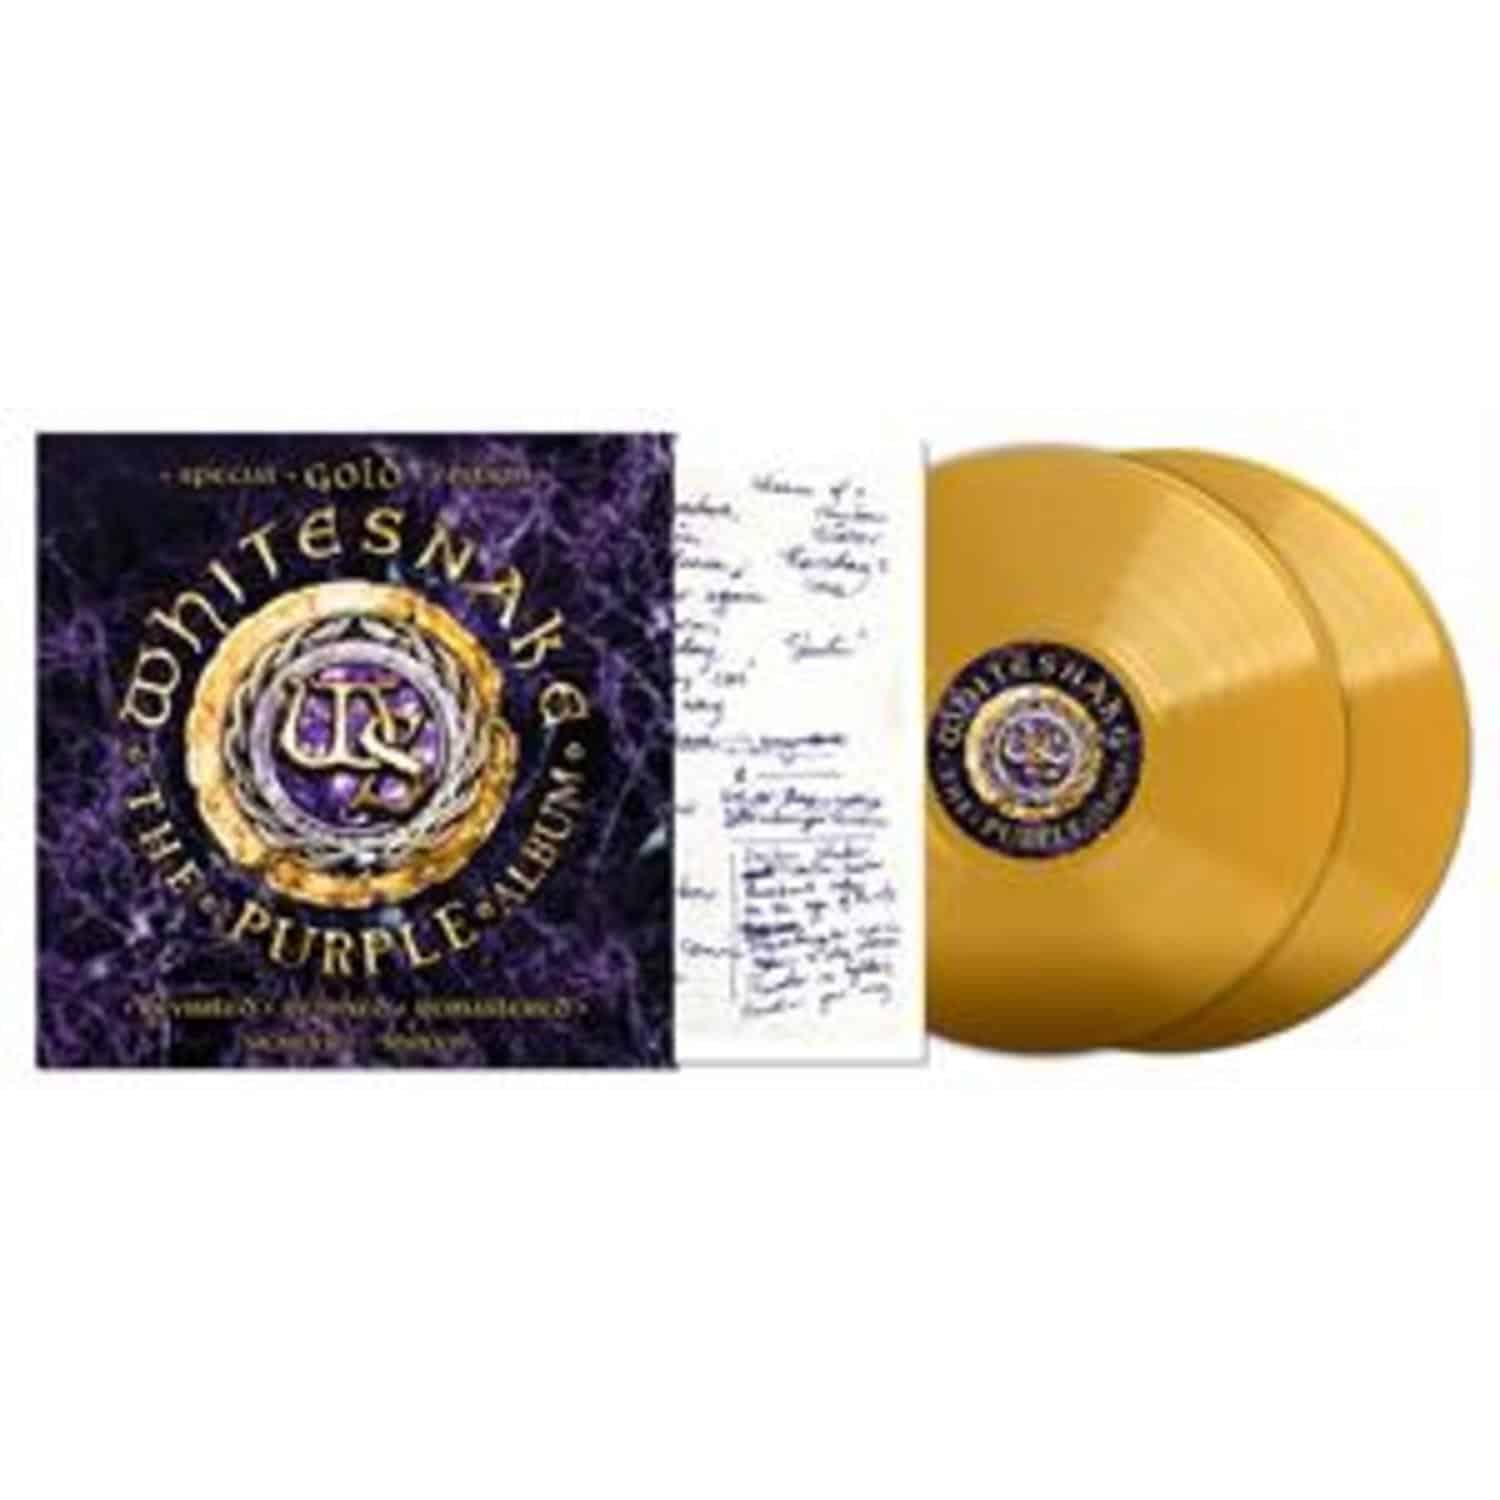 Whitesnake - THE PURPLE ALBUM: SPECIAL GOLD EDITION 